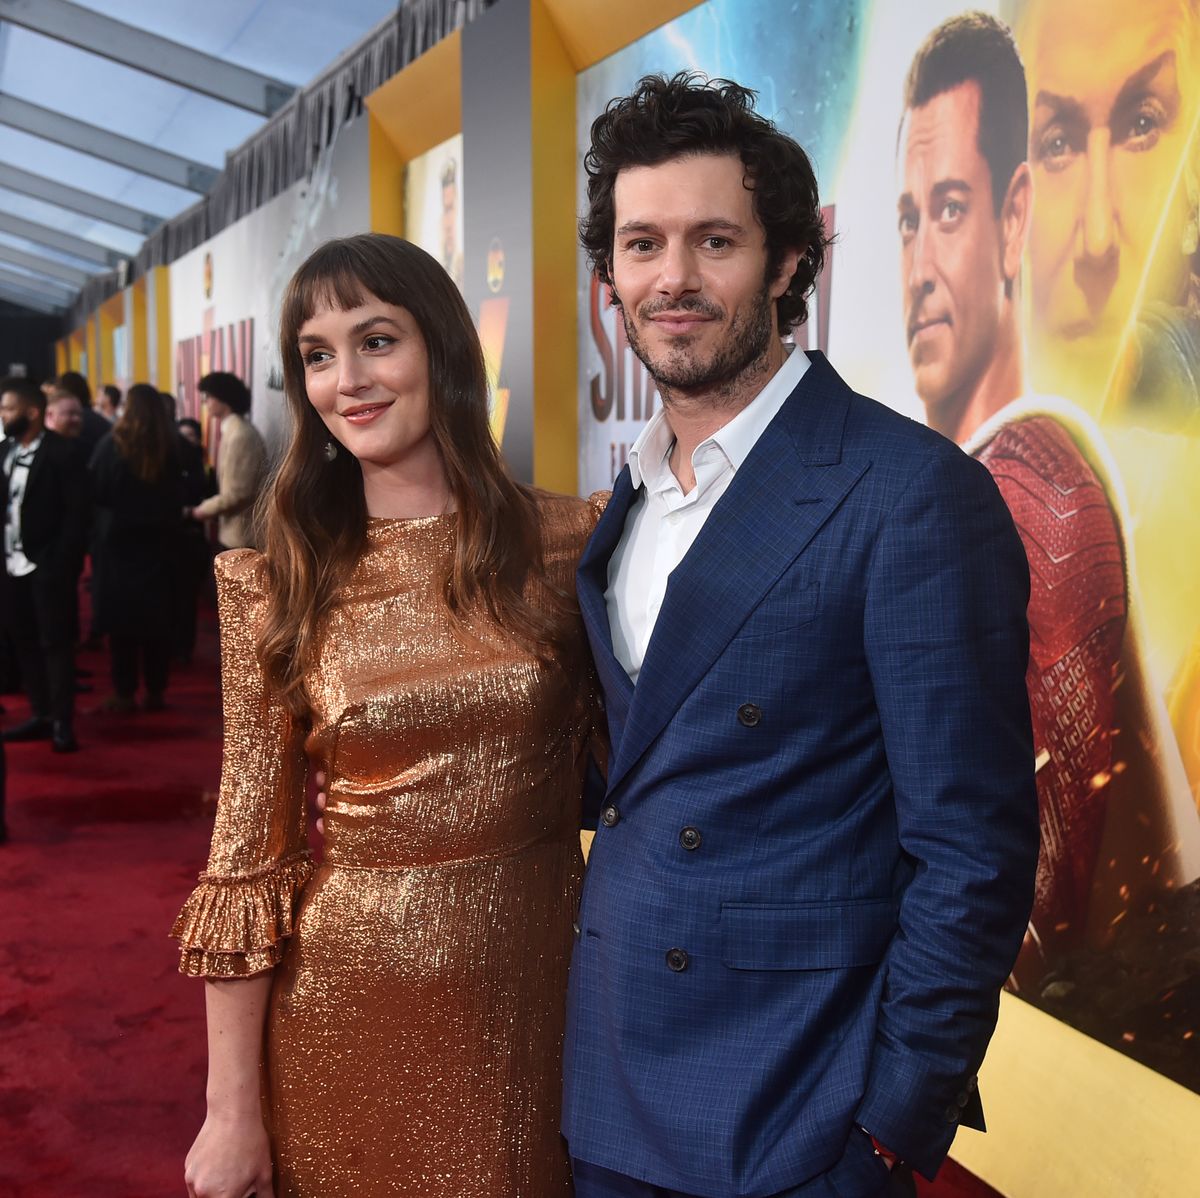 los angeles, california march 14 leighton meester and adam brody attend the premiere of warner bros shazam fury of the gods at regency village theatre on march 14, 2023 in los angeles, california photo by alberto rodriguezgathe hollywood reporter via getty images